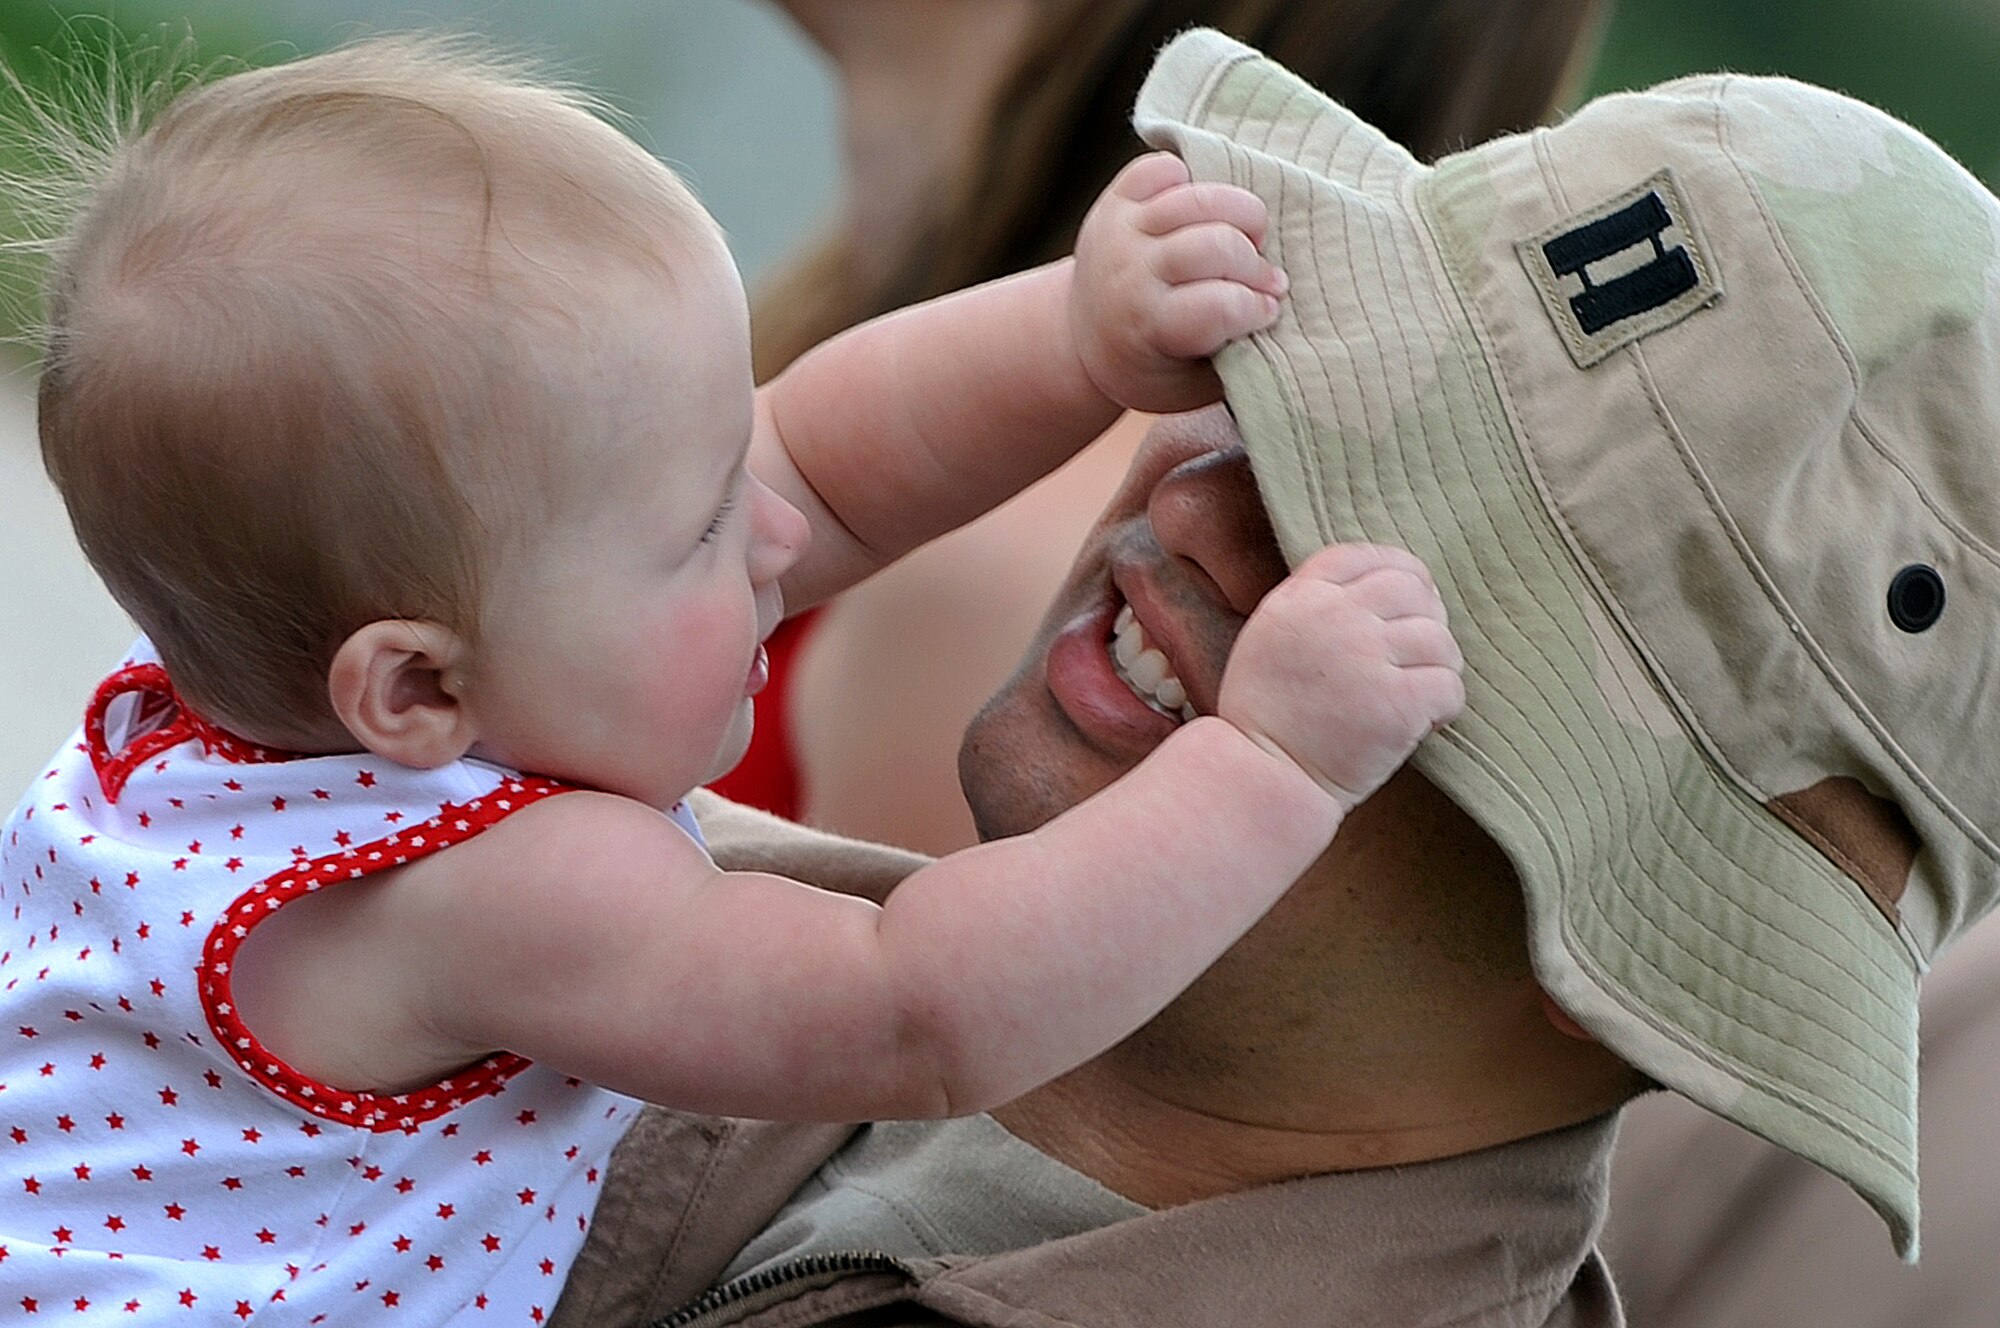 Capt. Steven Fowler, 34th Bomb Squadron weapons system operator, holds his seven-month-old daughter Makenna while waiting outside of the deployment center, July 22,. Captain Fowler is deploying to Southwest Asia in support of Operations Iraqi Freedom and Enduring Freedom. (U.S. Air Force photo/Senior Airman Marc I. Lane)